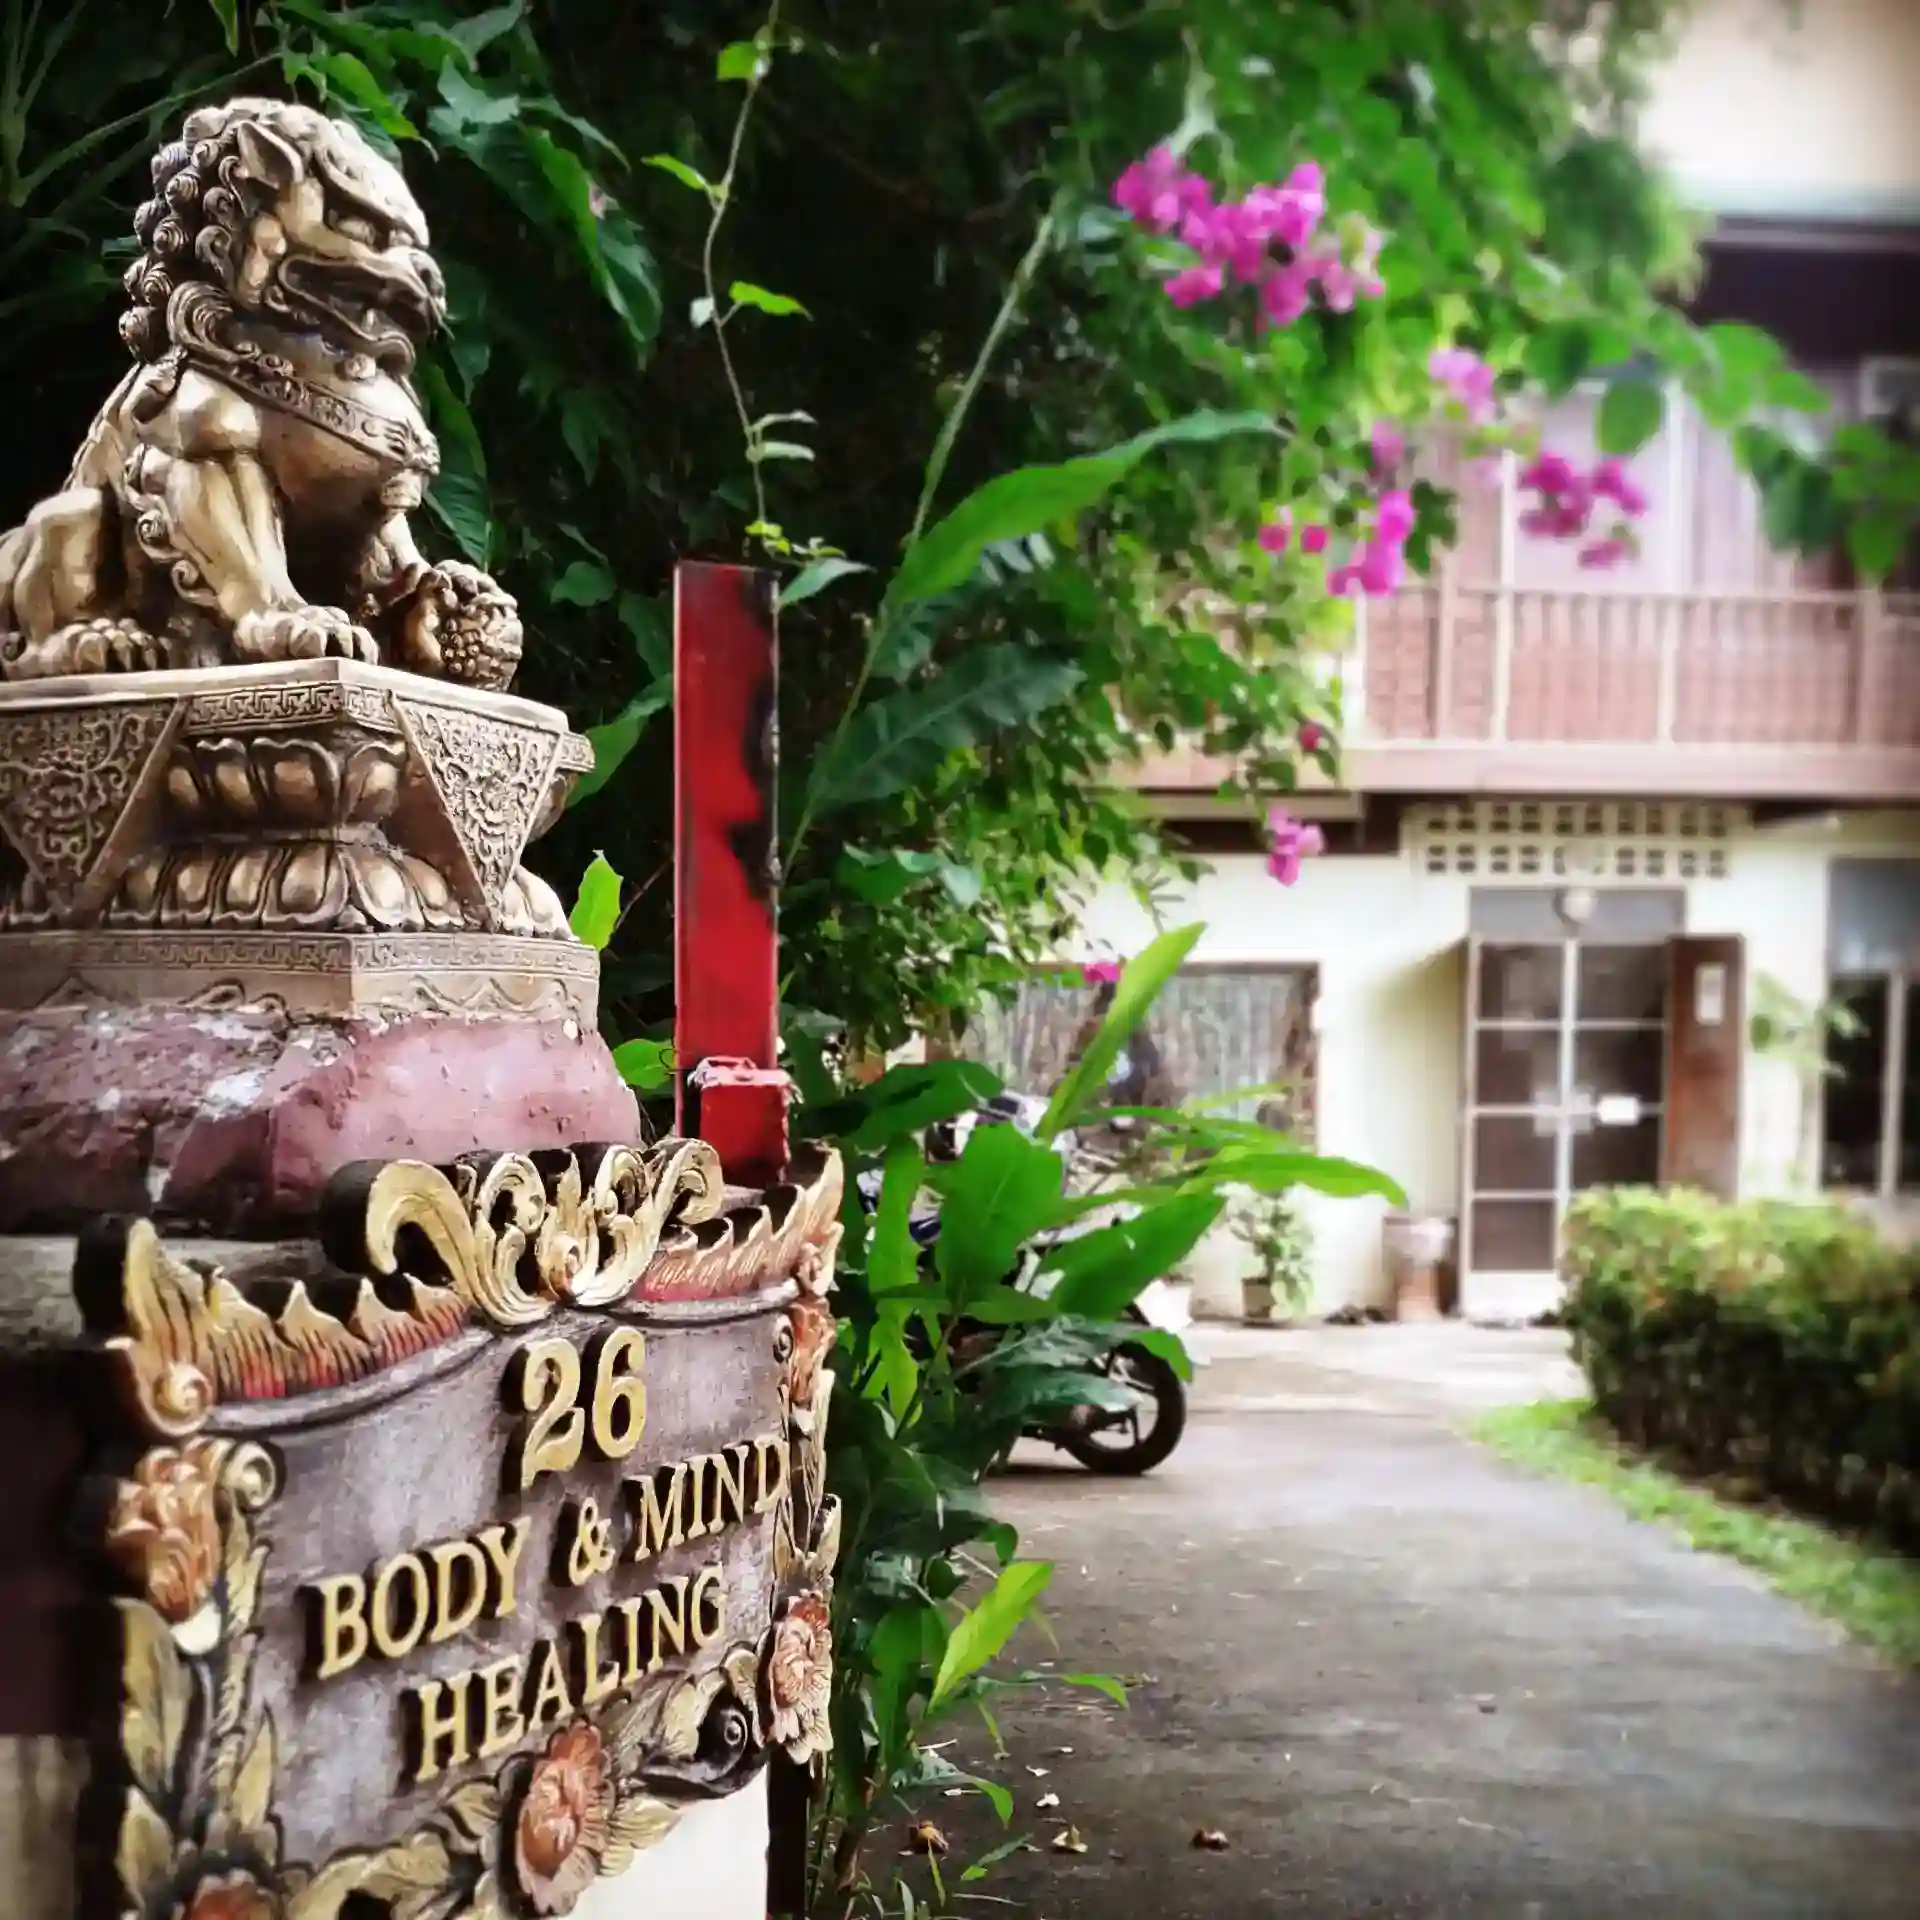 The entrance to the Body and Mind Healing Meditation Center in Chiang Mai